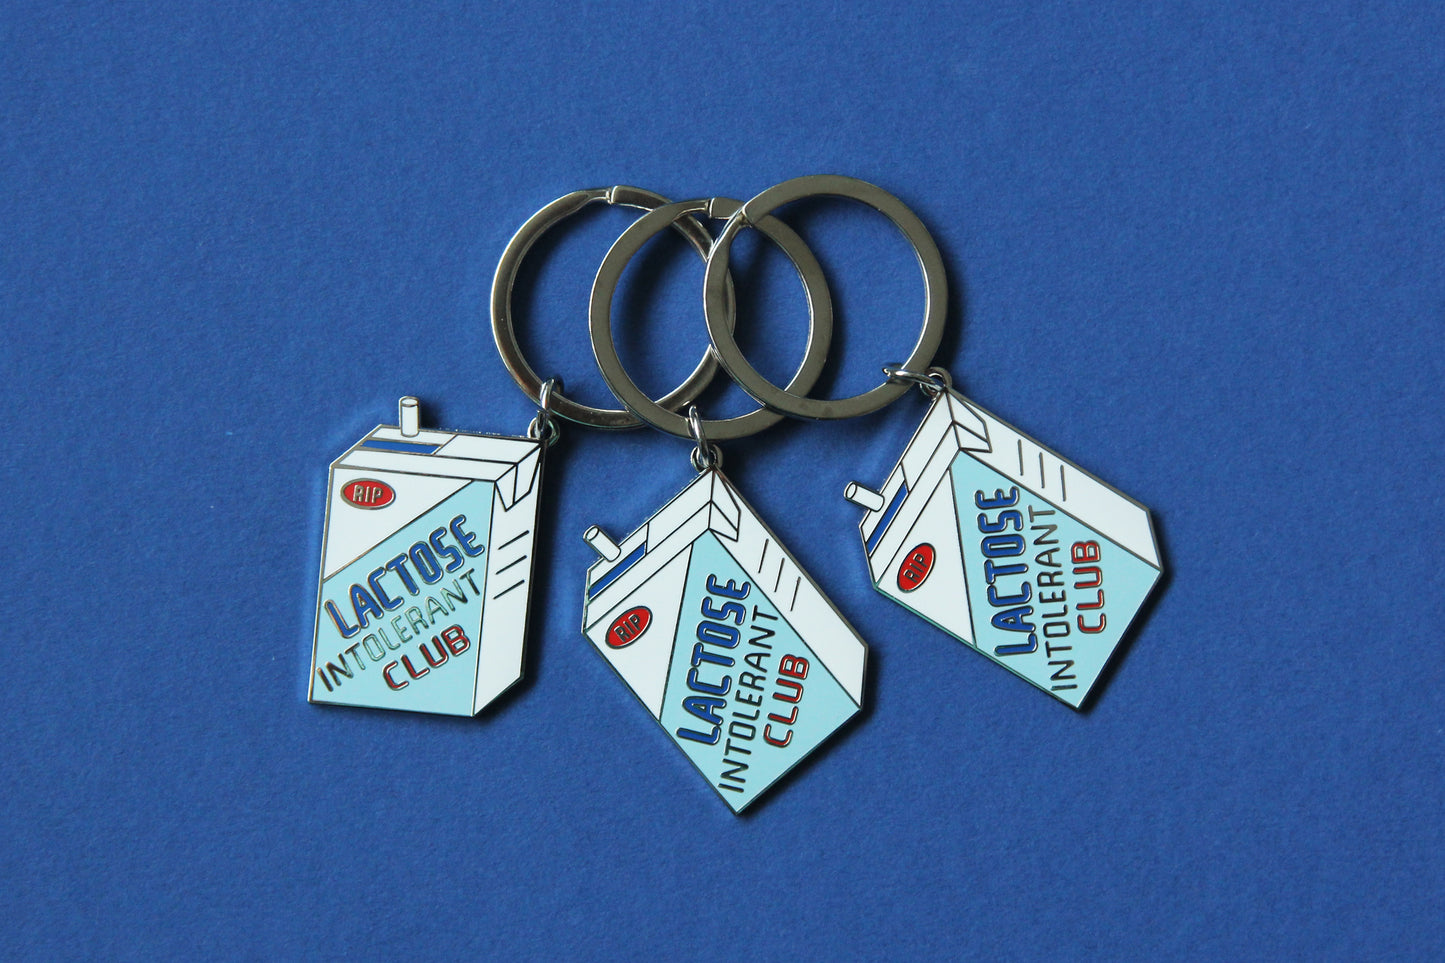 3 enamel keychains showing a soymilk carton that says" Lactose Intolerant Club" over a blue background.